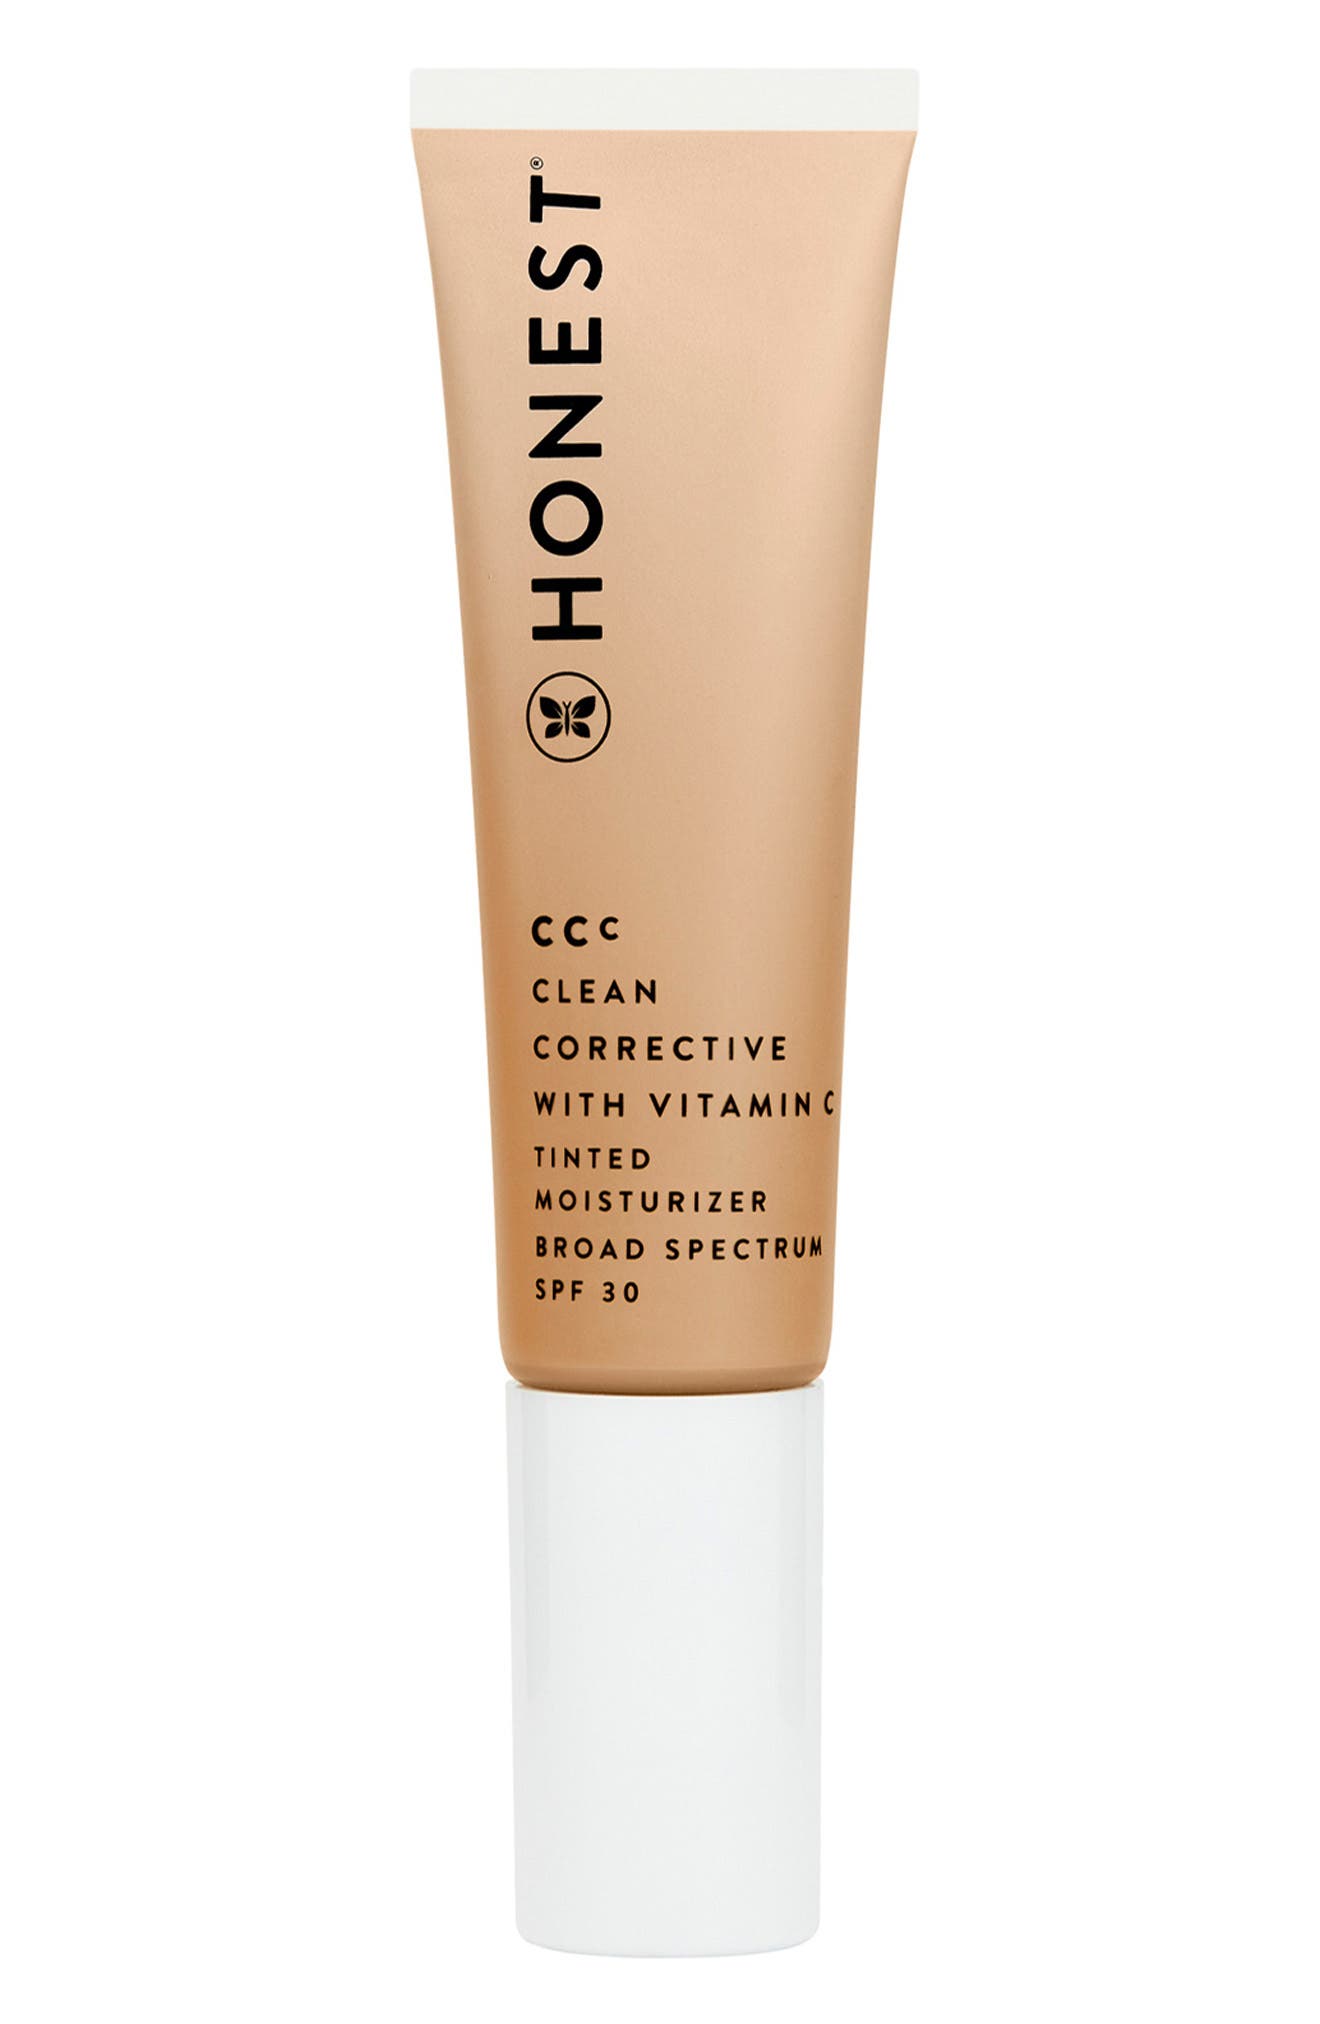 CCC CLEAN CORRECTIVE SPF 30 TINTED MOISTURIZER